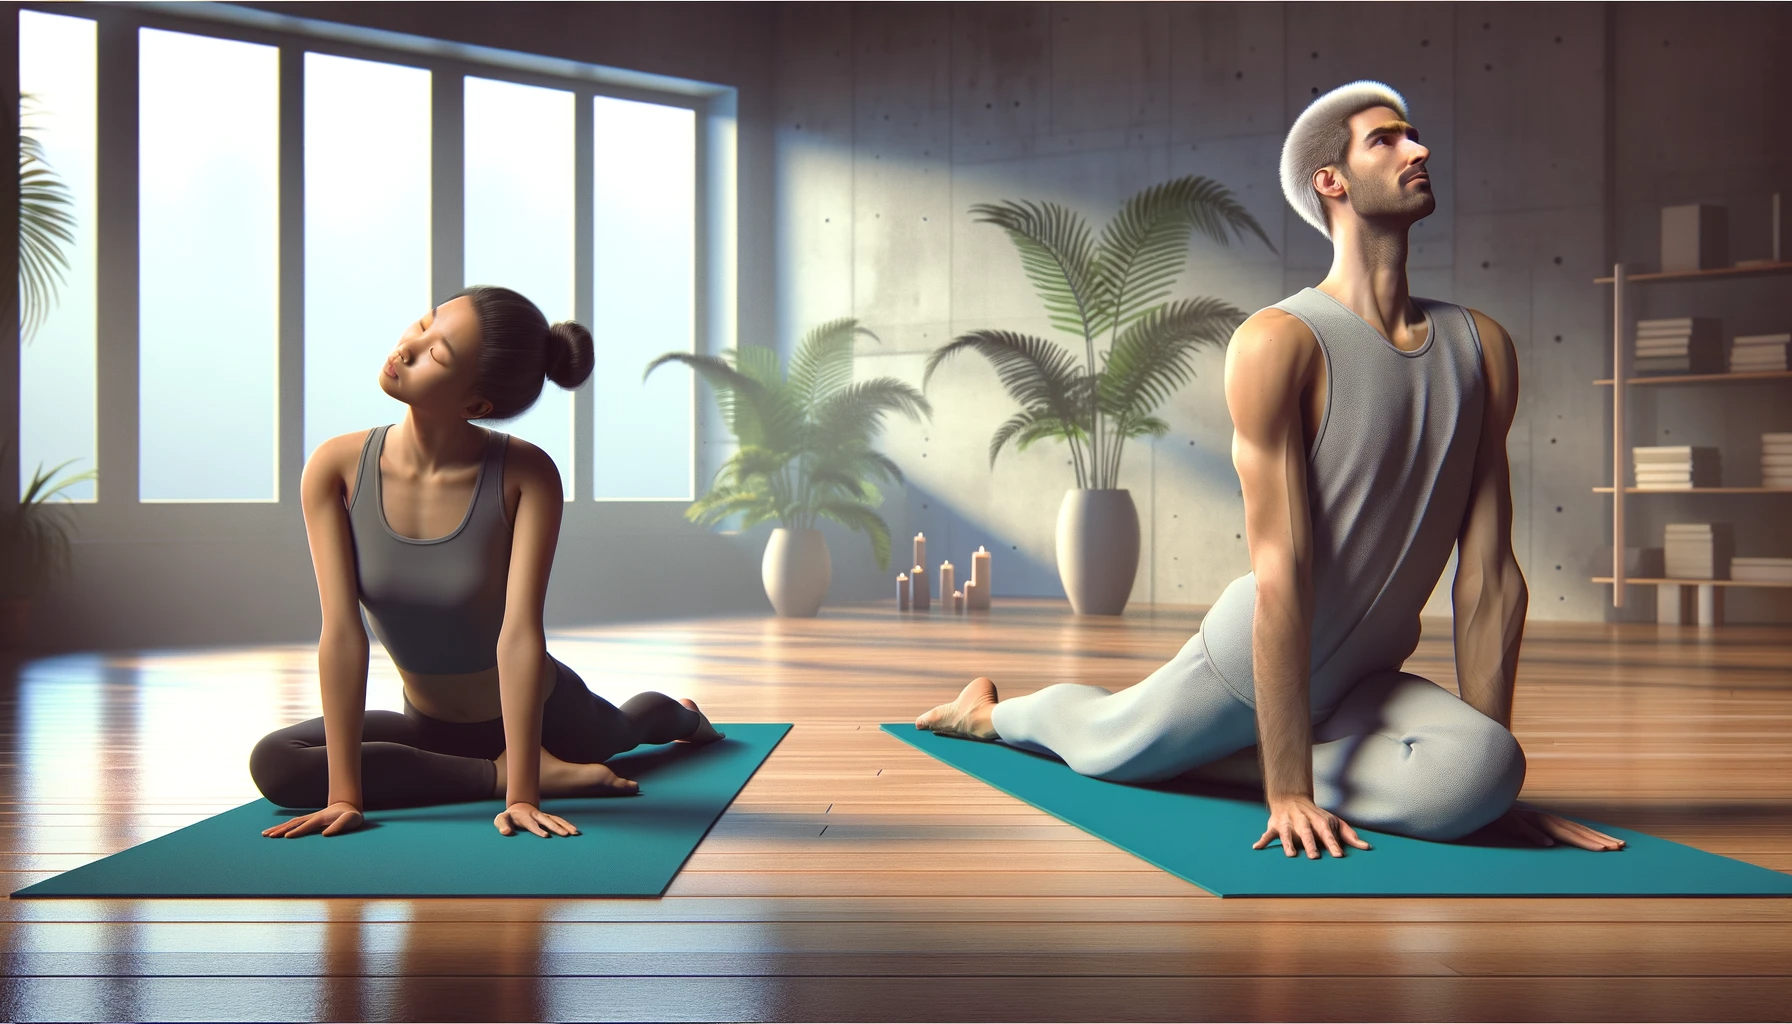 depicting a beginner yogi awkwardly positioned in the Baby Cobra pose, alongside a professional demonstrating the correct form